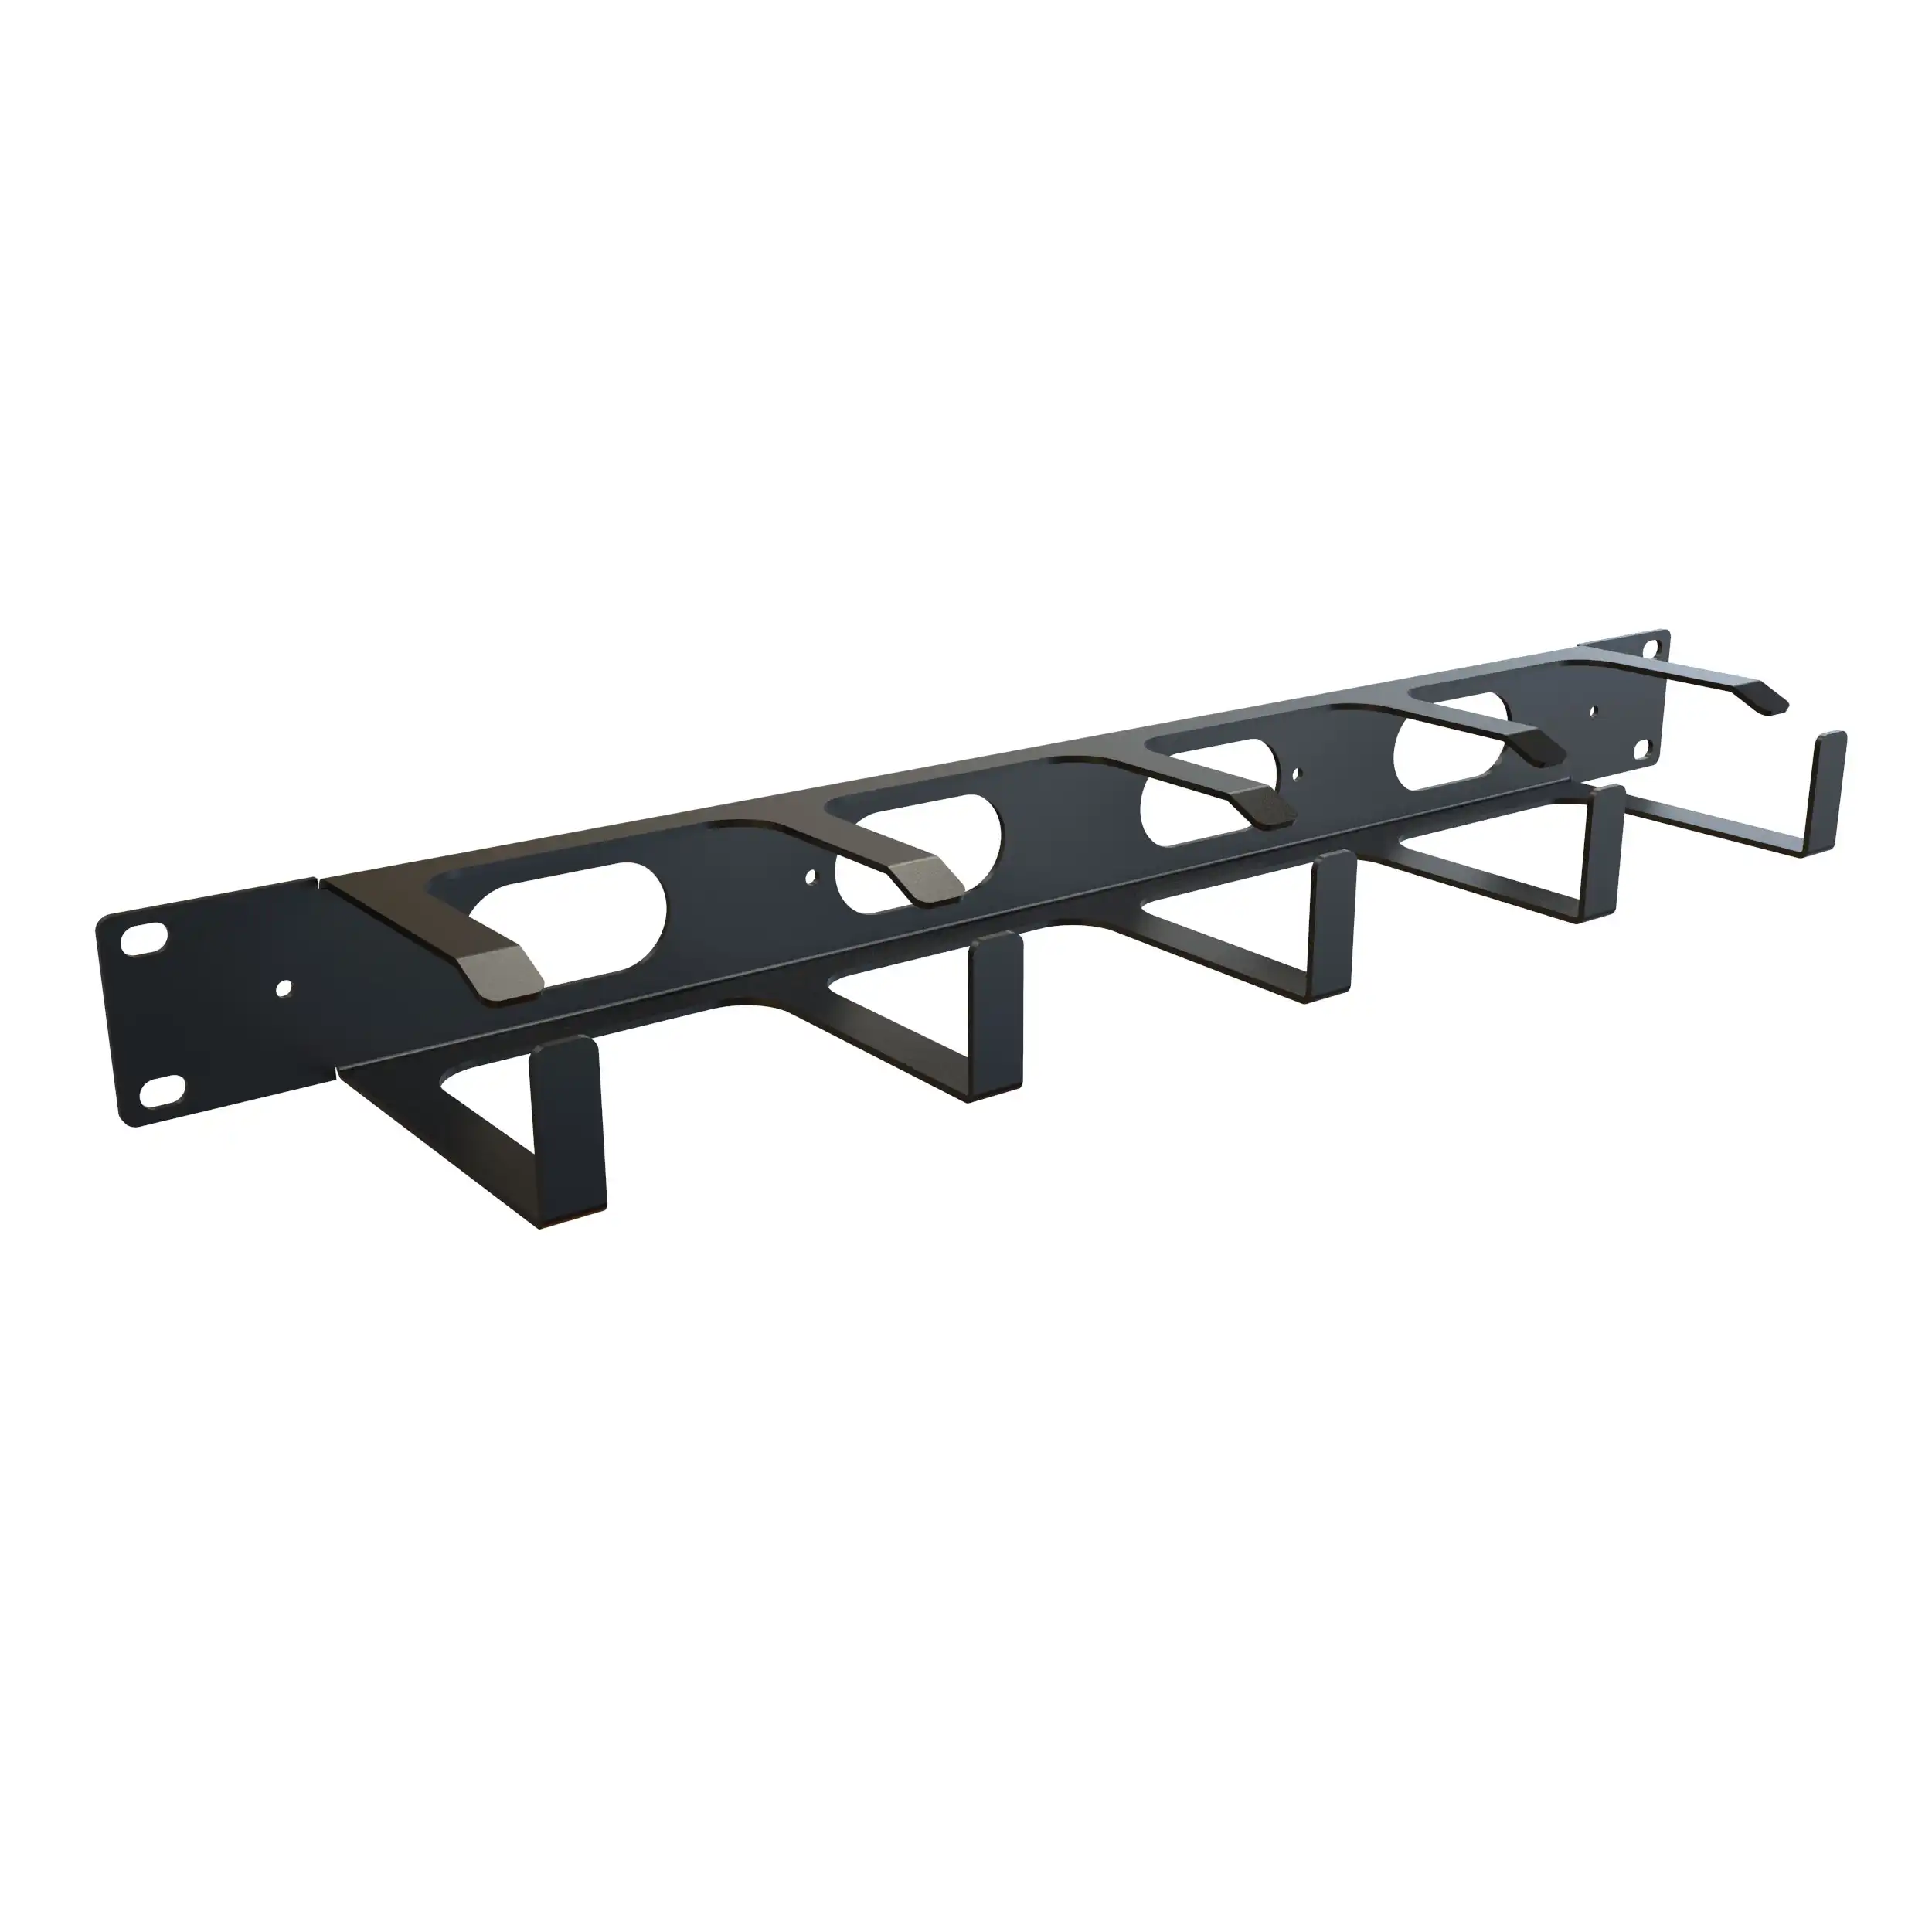 RB-HRM Series - Hammond Manufacturing Rack Systems at KGA Enclosures Ltd